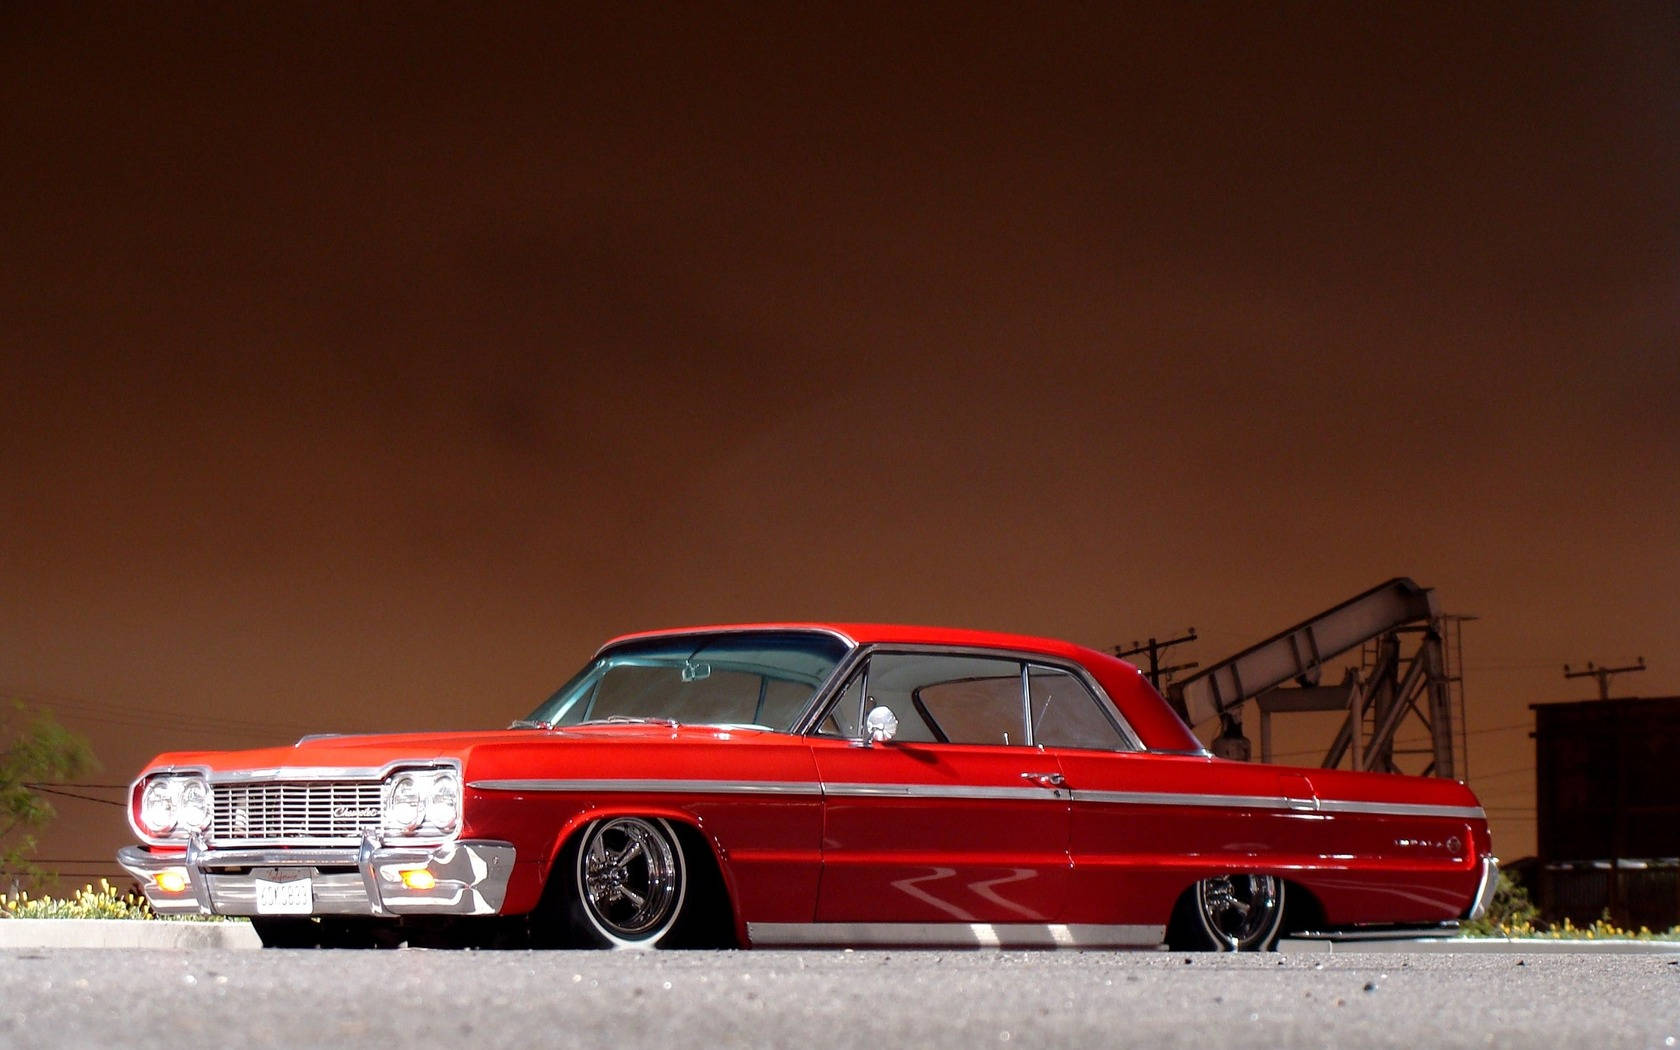 Lowrider Impala Against Brown Sky Background